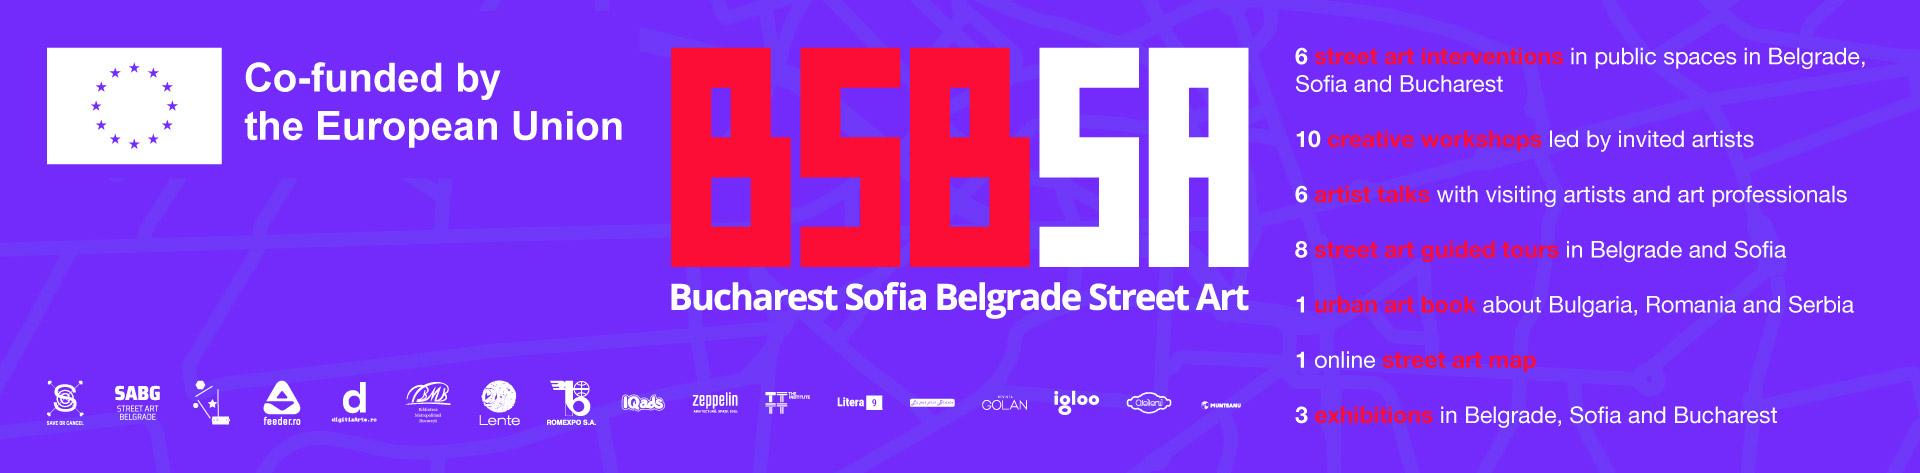 The BSBSA project brings together artists from Bulgaria, Serbia and Romania